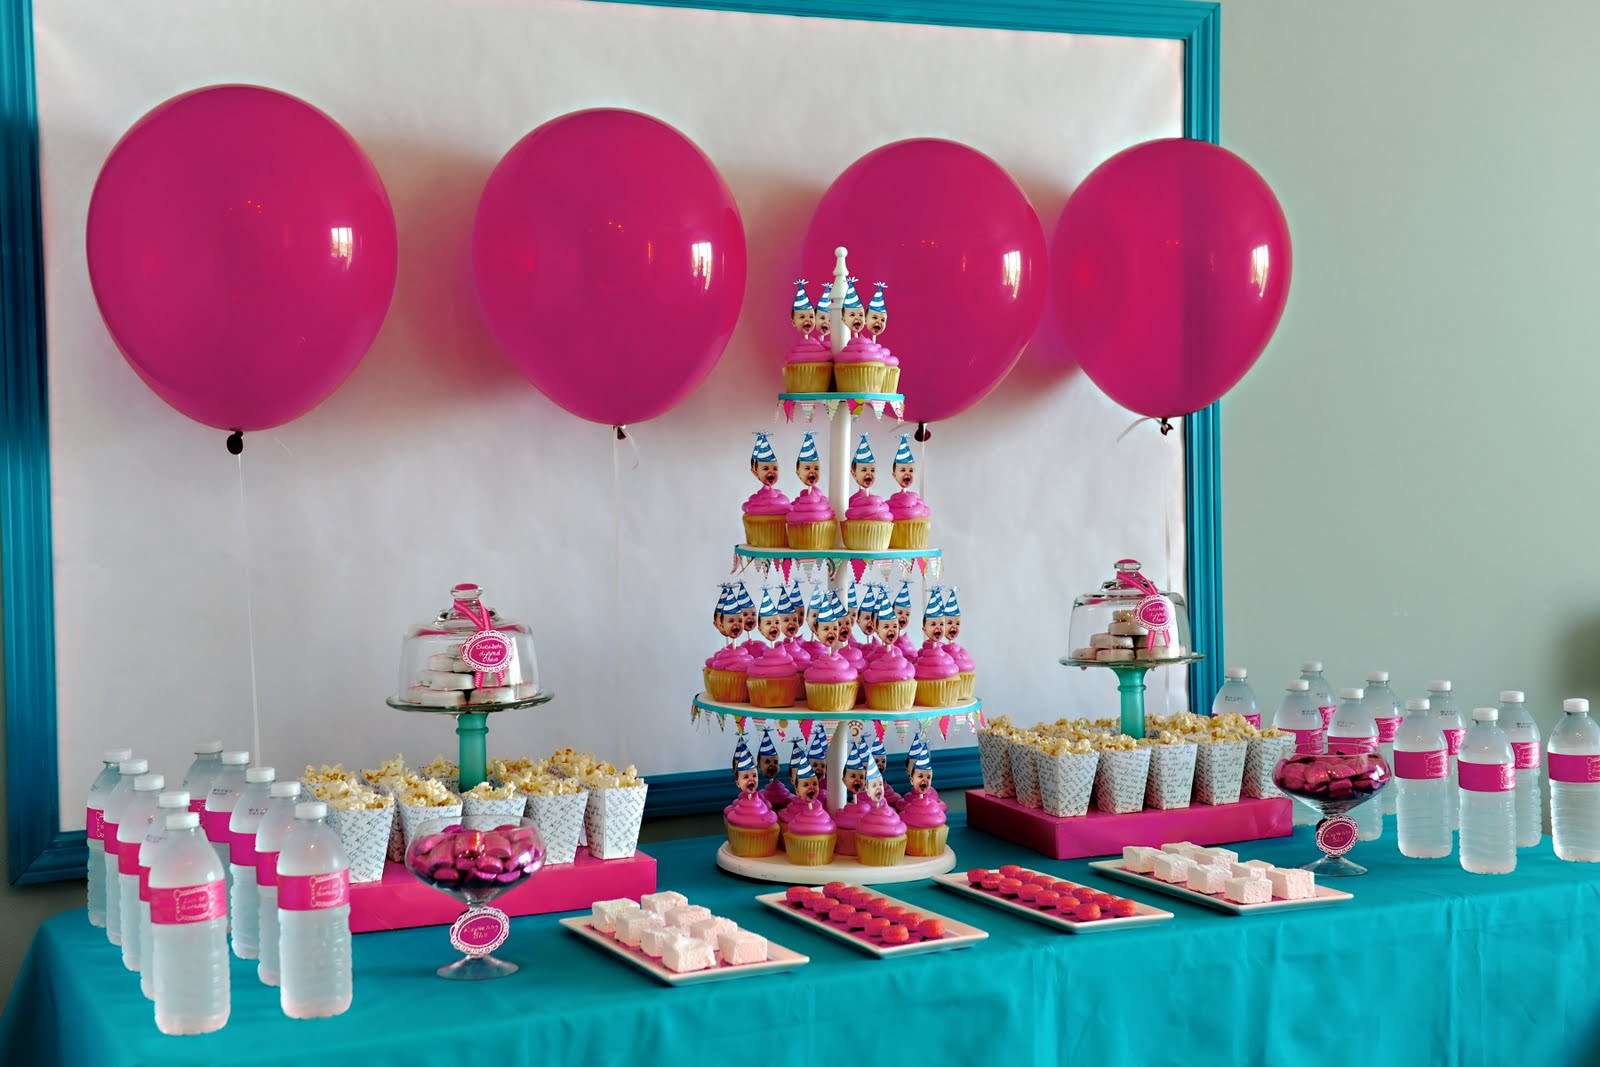 Winter Birthday Party Ideas For 1 Year Old
 Elle Belle Creative e Year Old in a Flash The Dessert